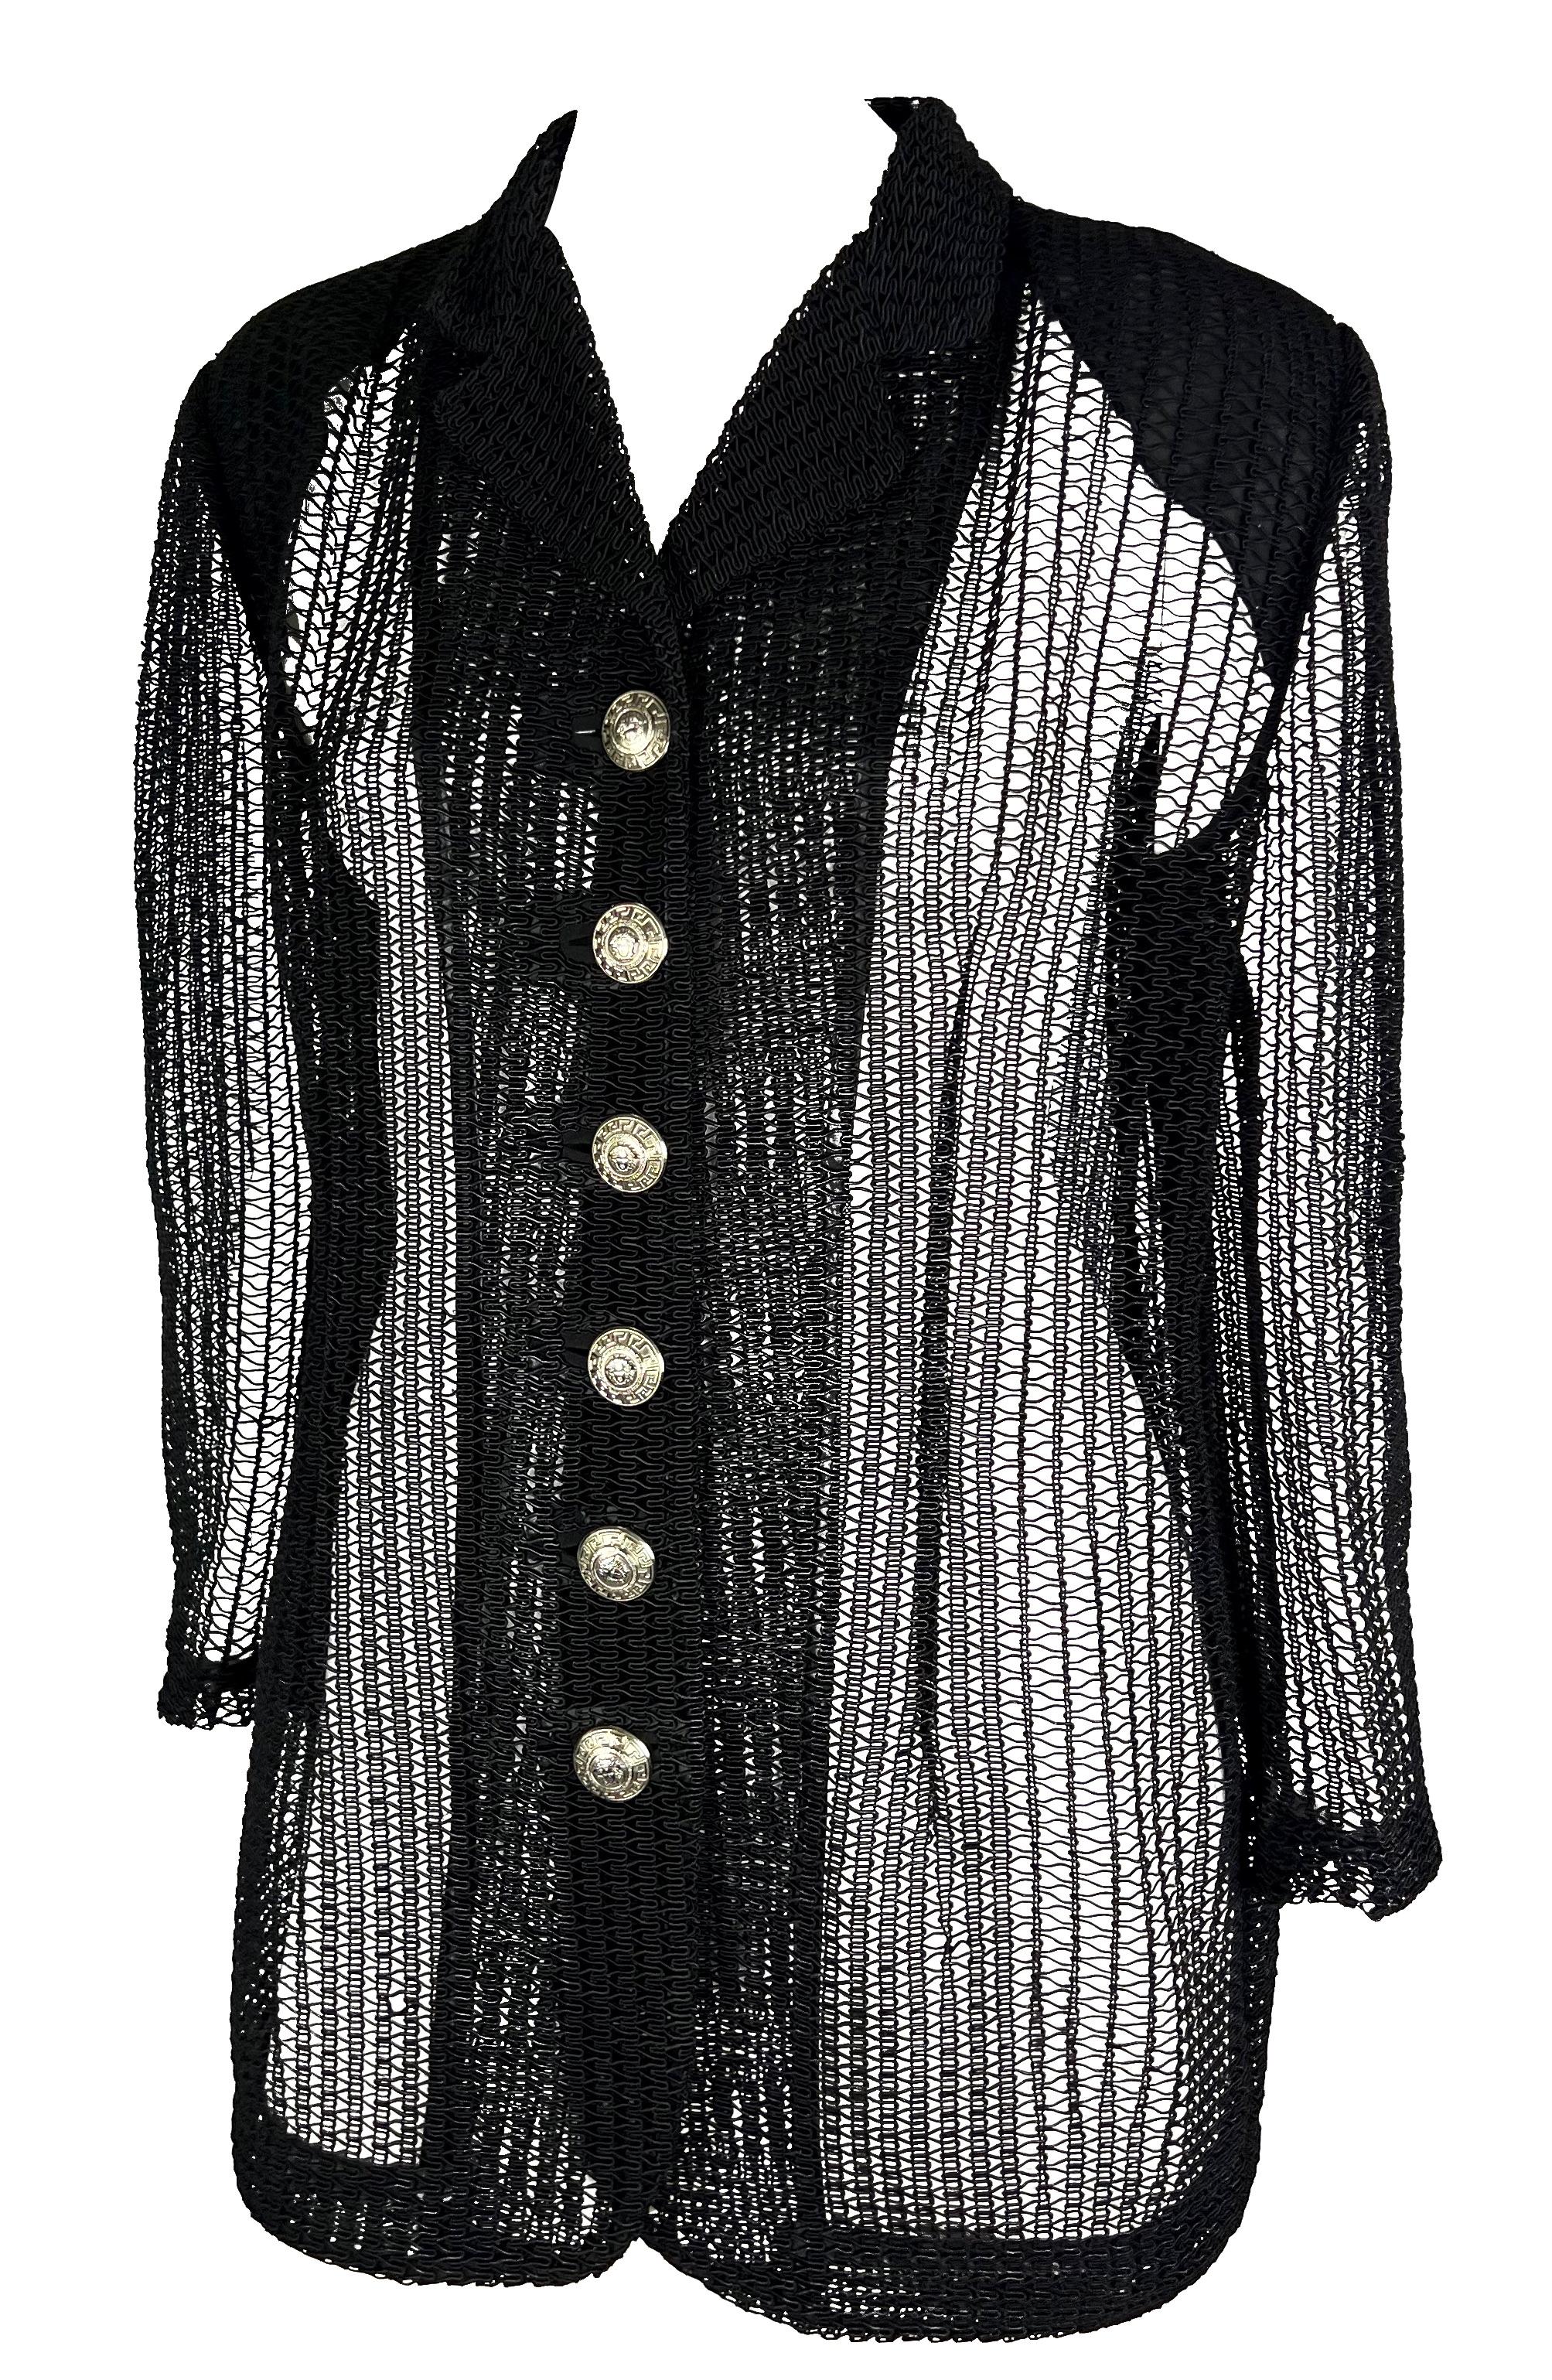 Presenting a black knit Gianni Versace sheer blazer, designed by Gianni Versce. From the 1990s, this loose-knit blazer effortlessly combines sophistication and comfort. The oversized silhouette adds a contemporary edge, while the large silver-tone